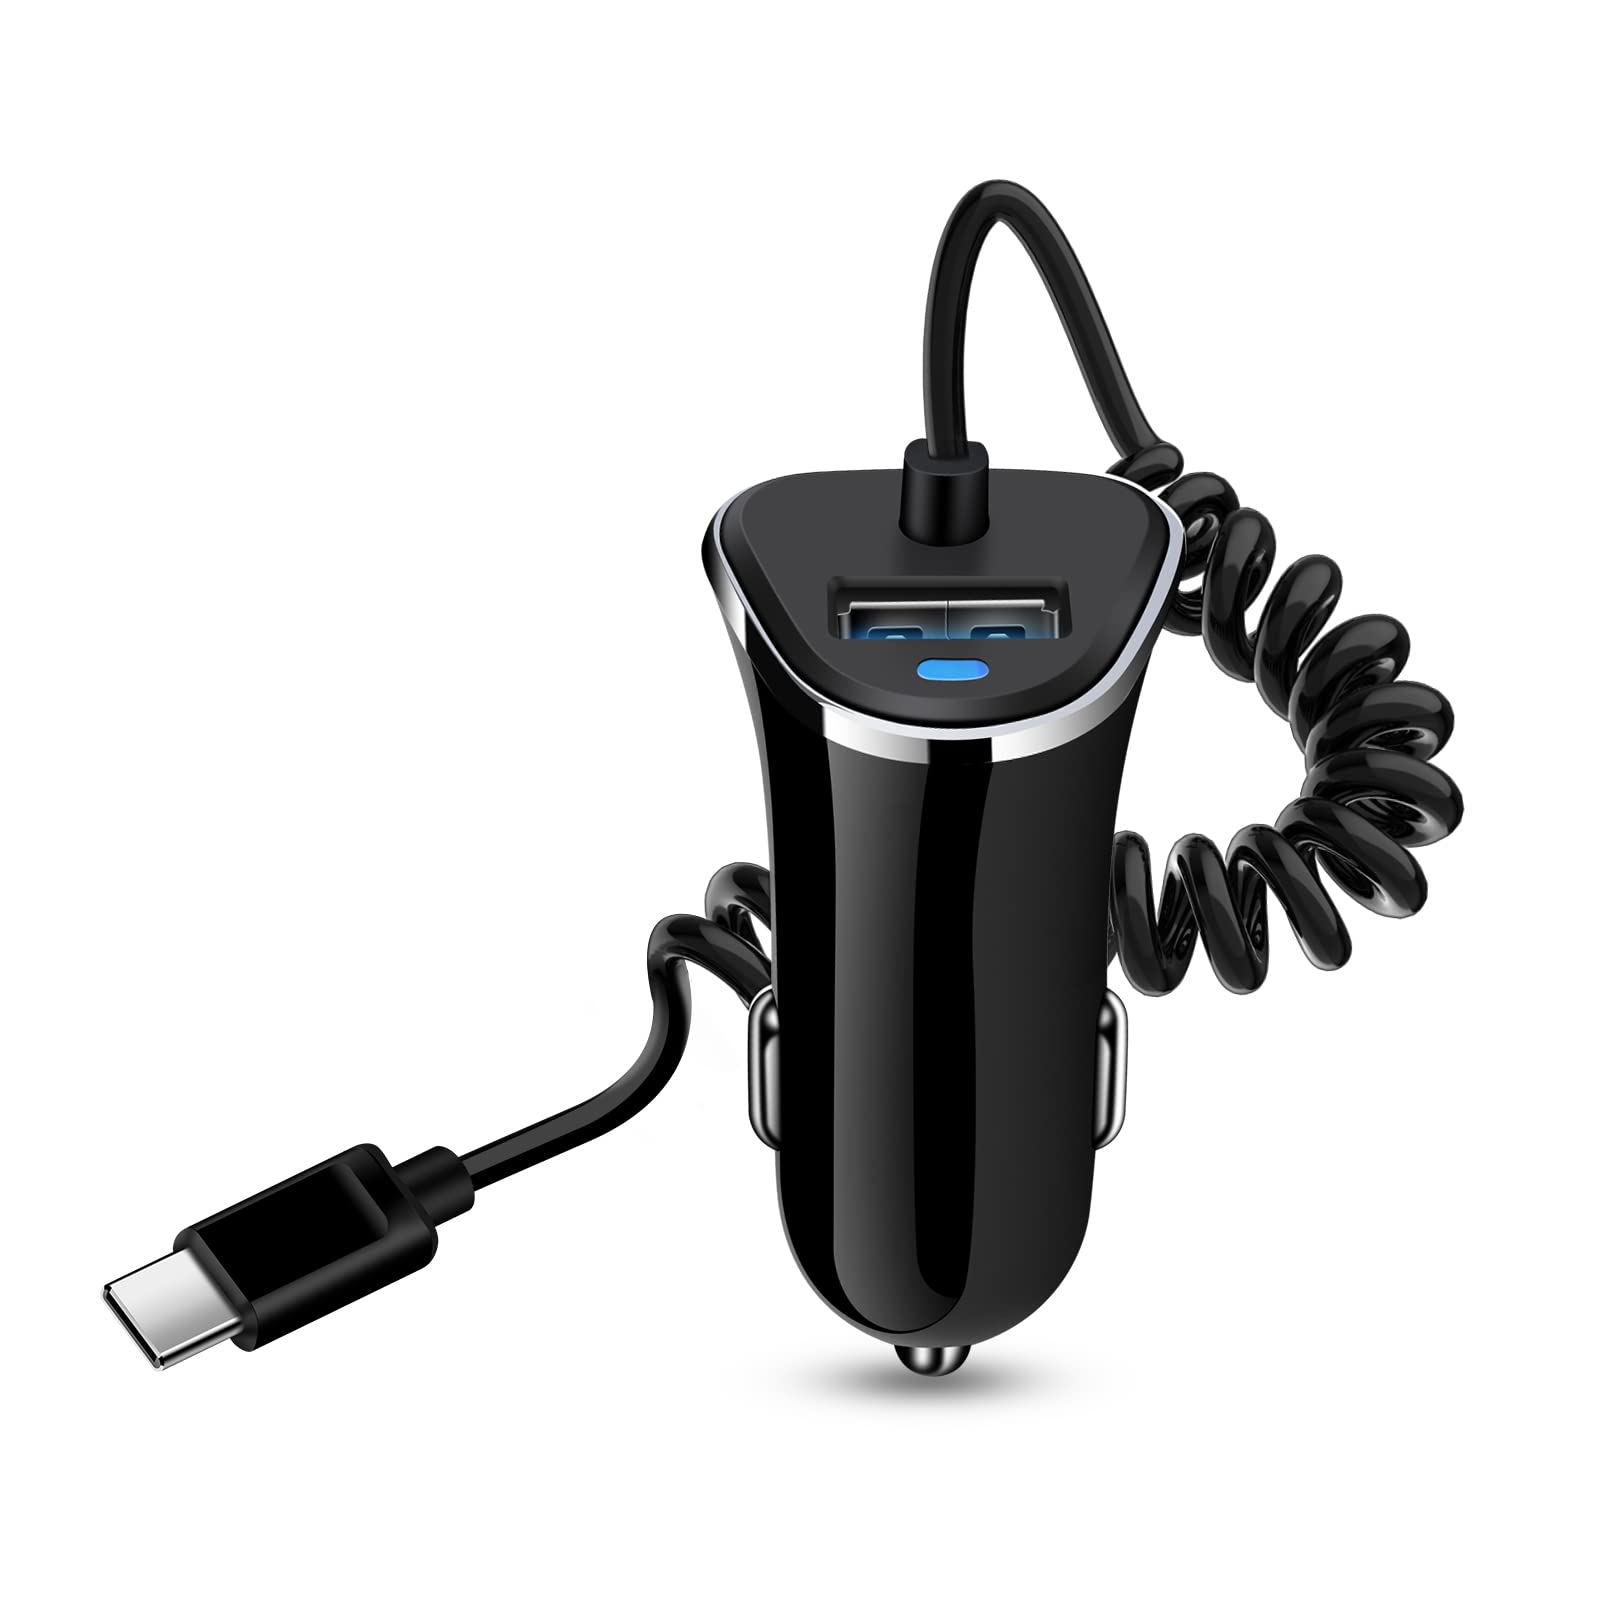 Android Type C Fast Car Charger for Samsung Galaxy S23 A14 A54 Z Fold 5 4 Z Flip 5 4 S22 A53 A13 A03s A32 A52 S21 FE S20,3.4A Fast Car Charging Cigarette Lighter Adapter with 3ft USB C Coiled Cable